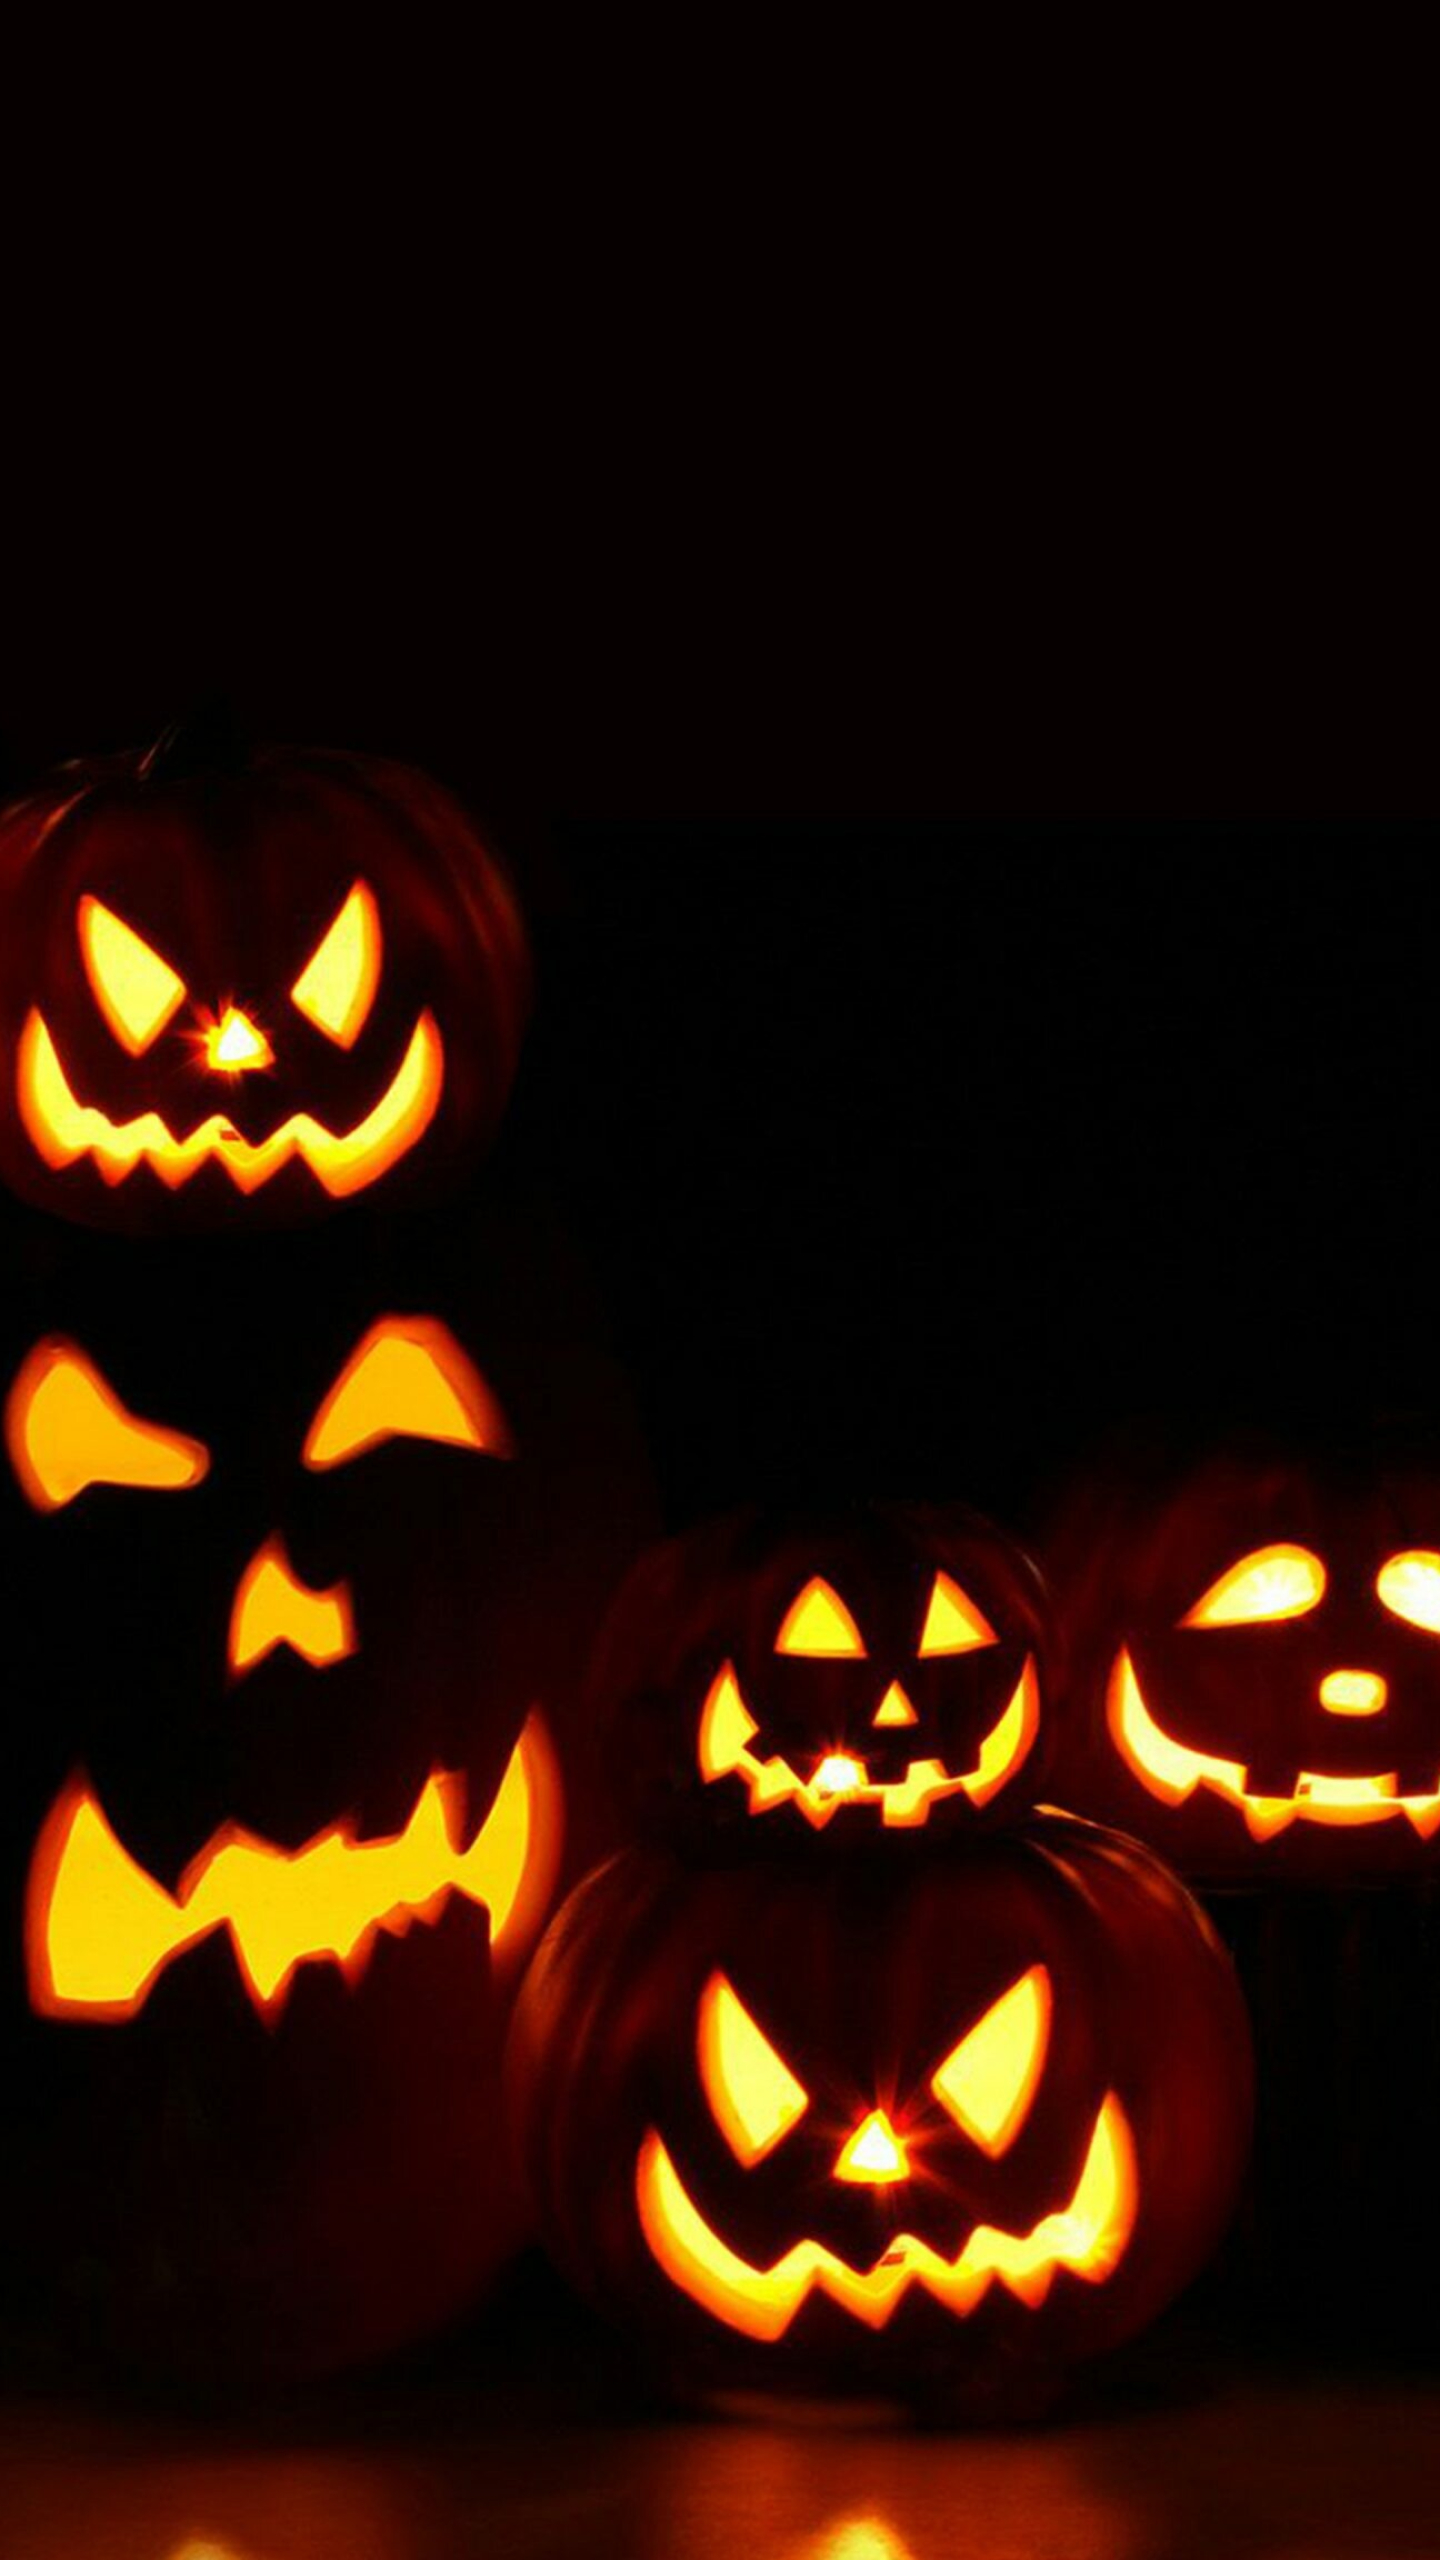 Halloween: Celebrated every year on October 31 to mark the eve of All Hallows' Day on November 1. 1440x2560 HD Background.